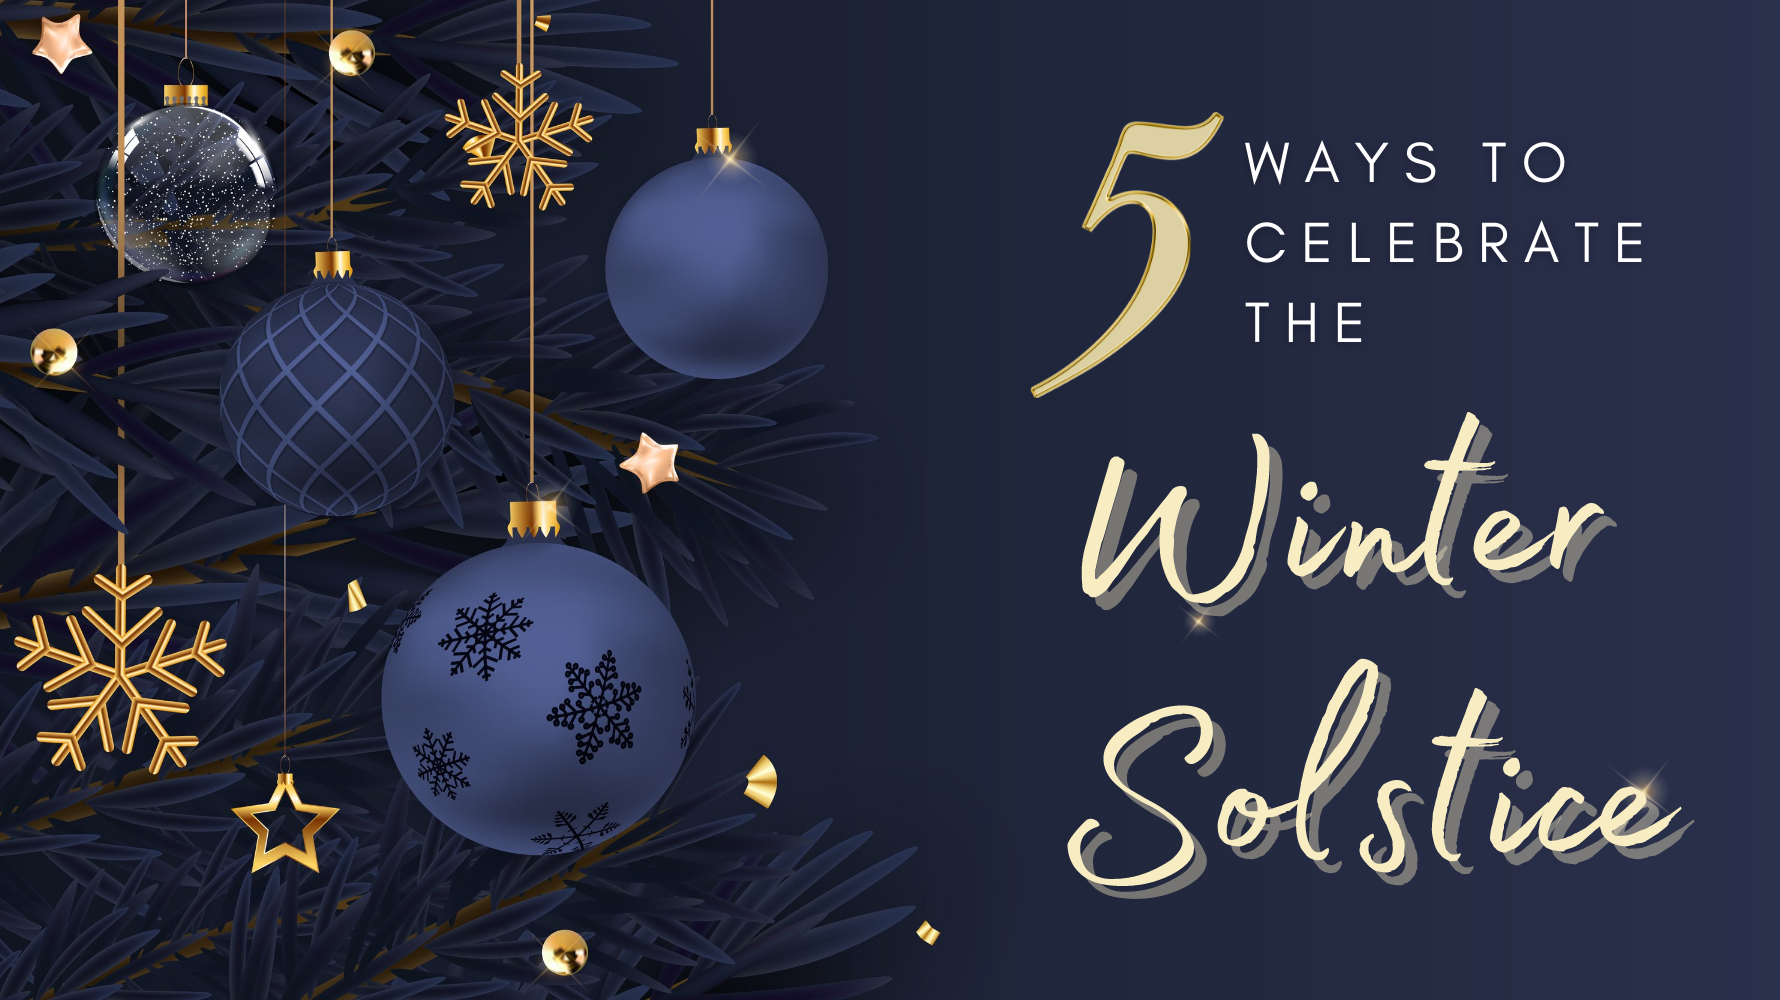 5 Ways To Celebrate The Winter Solstice